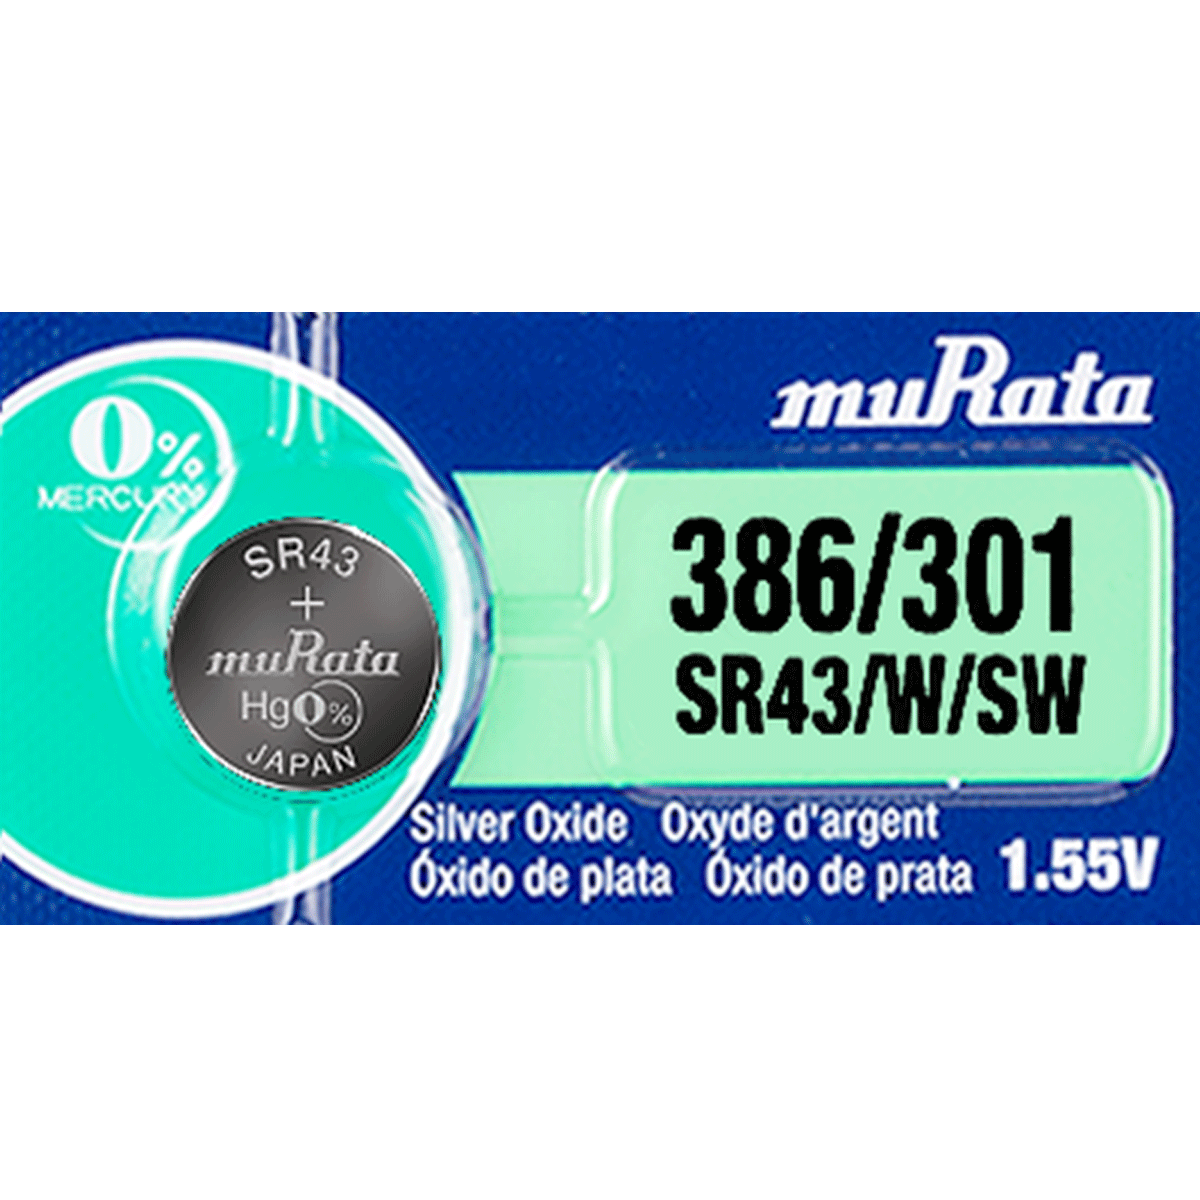 300x Murata 357 303 SR44 Silver Oxide Battery Made in Japan NEW